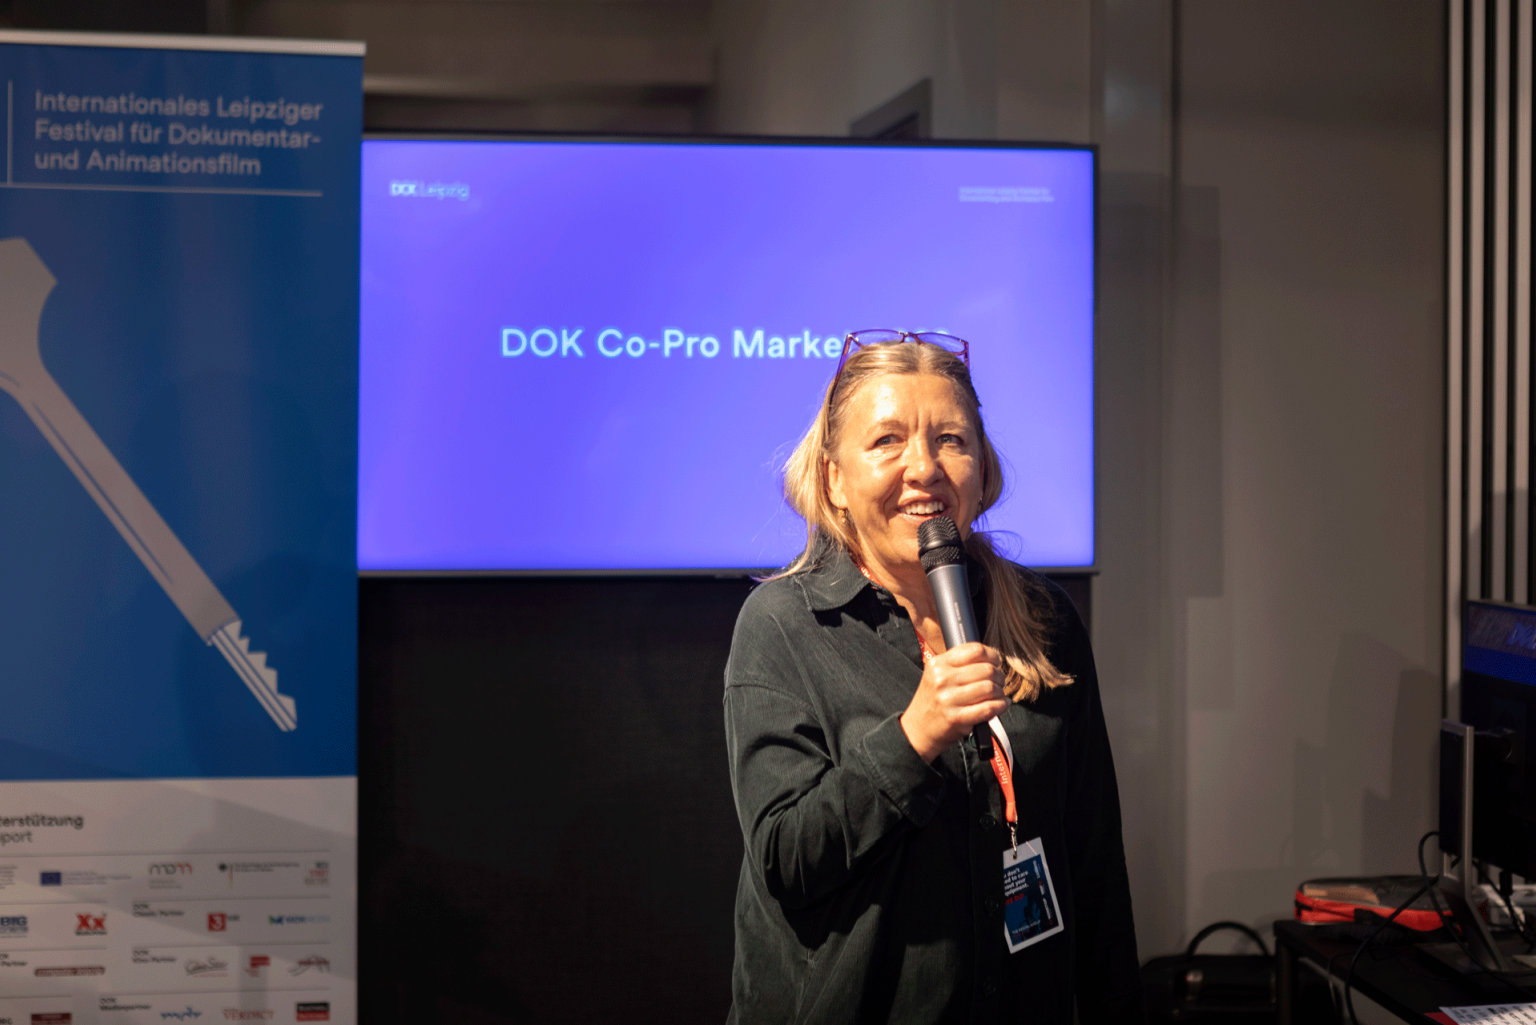 Director of DOK Industry Nadja Tennstedt stands in a room, talking into a microphone. In the background a screen with text: "DOK Co-Pro Market".